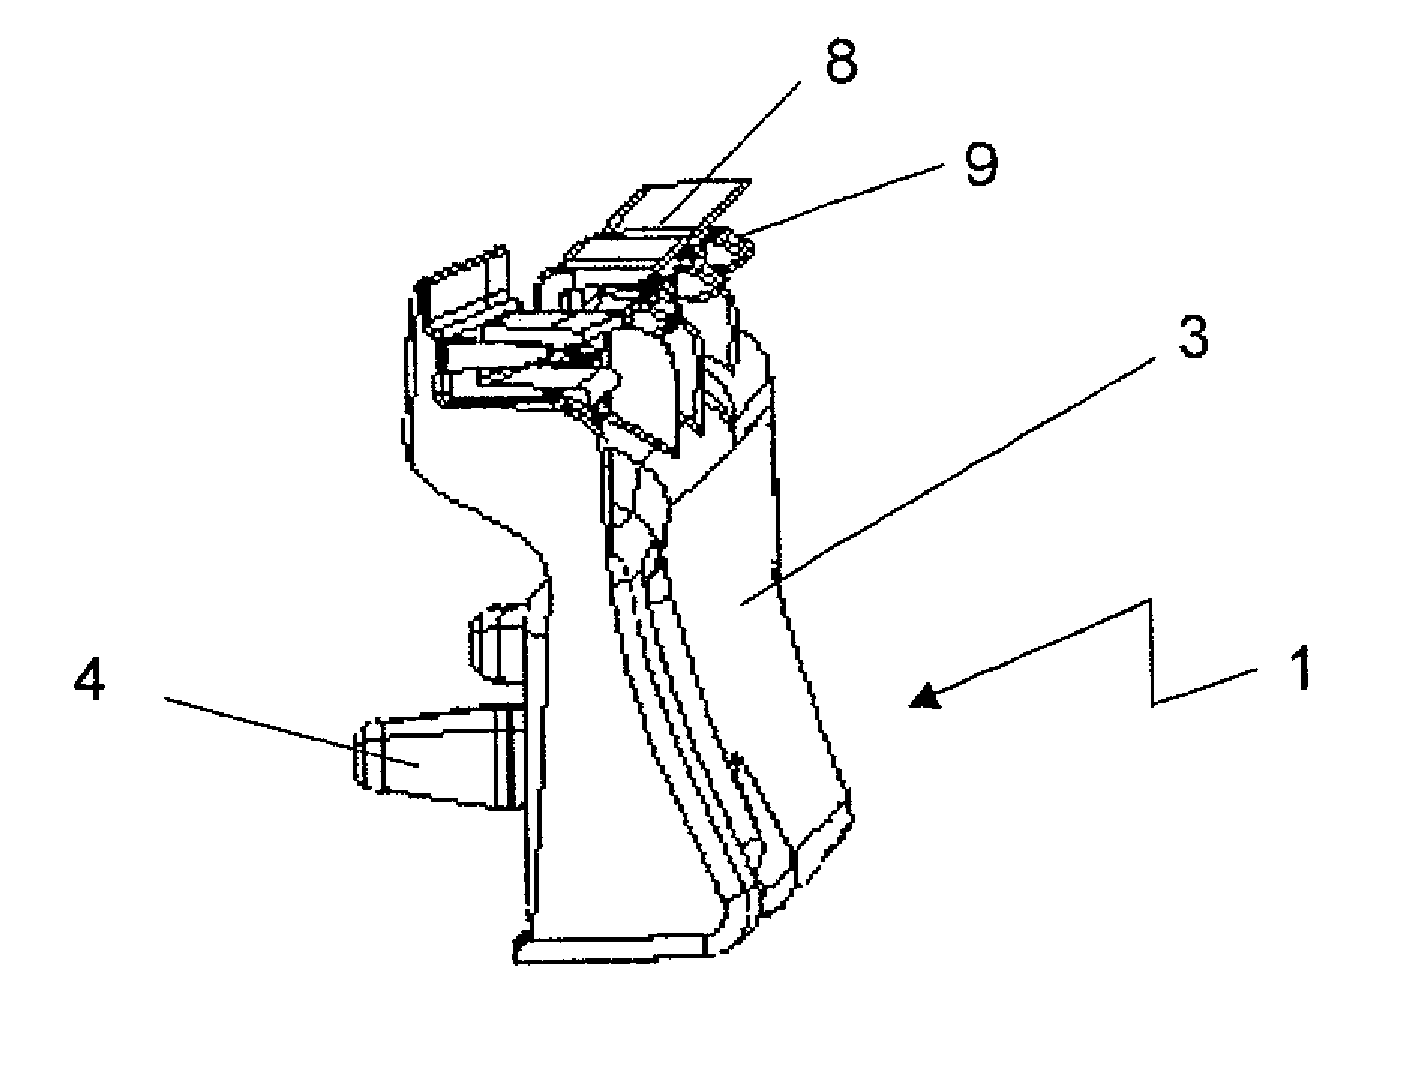 Mounting strip for mounting a formed part on a chassis body of a motor vehicle